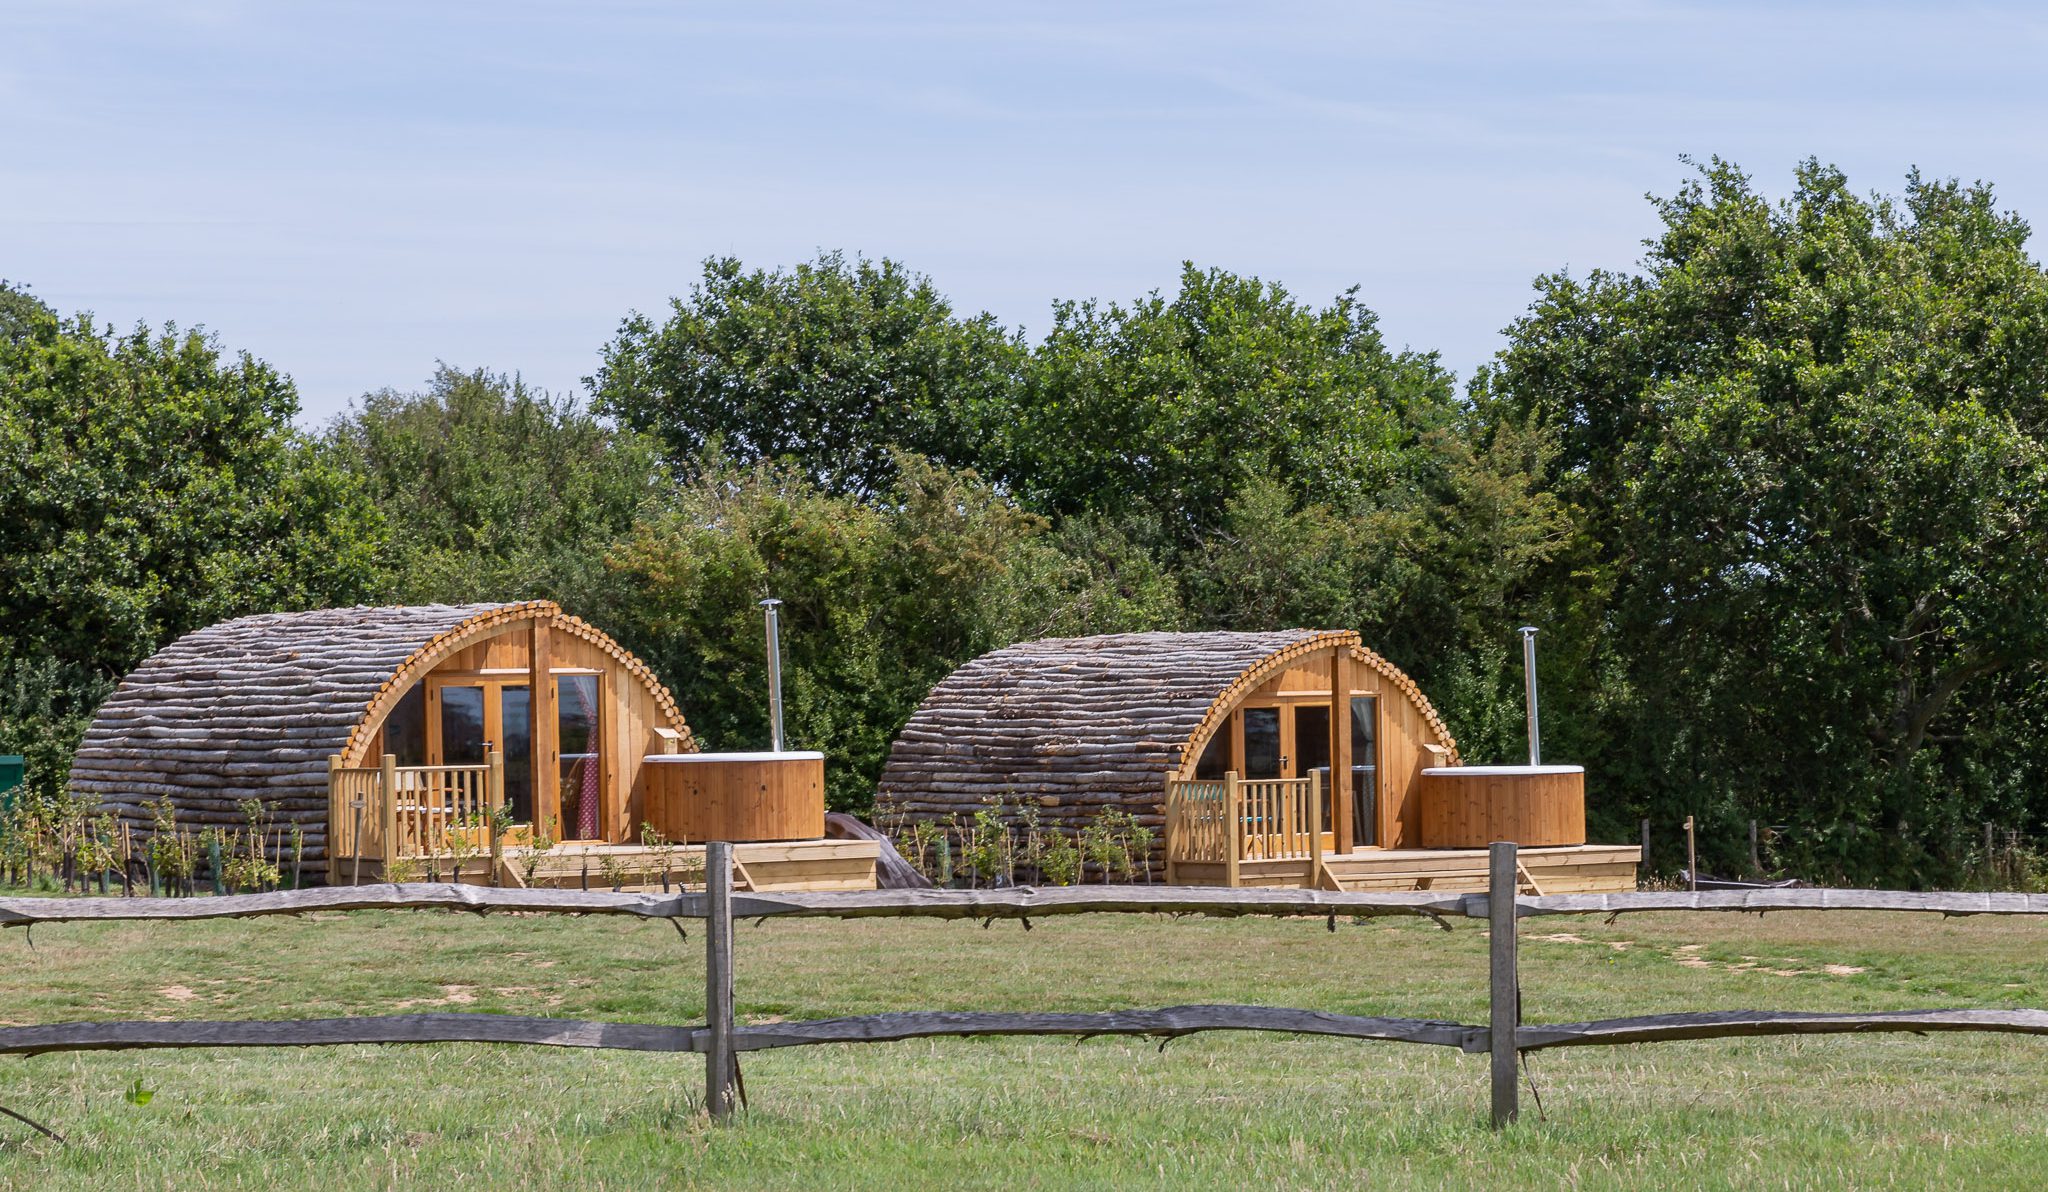 Timber Log Cabins Nestled In The Beautiful Grounds along The East Sussex Coast